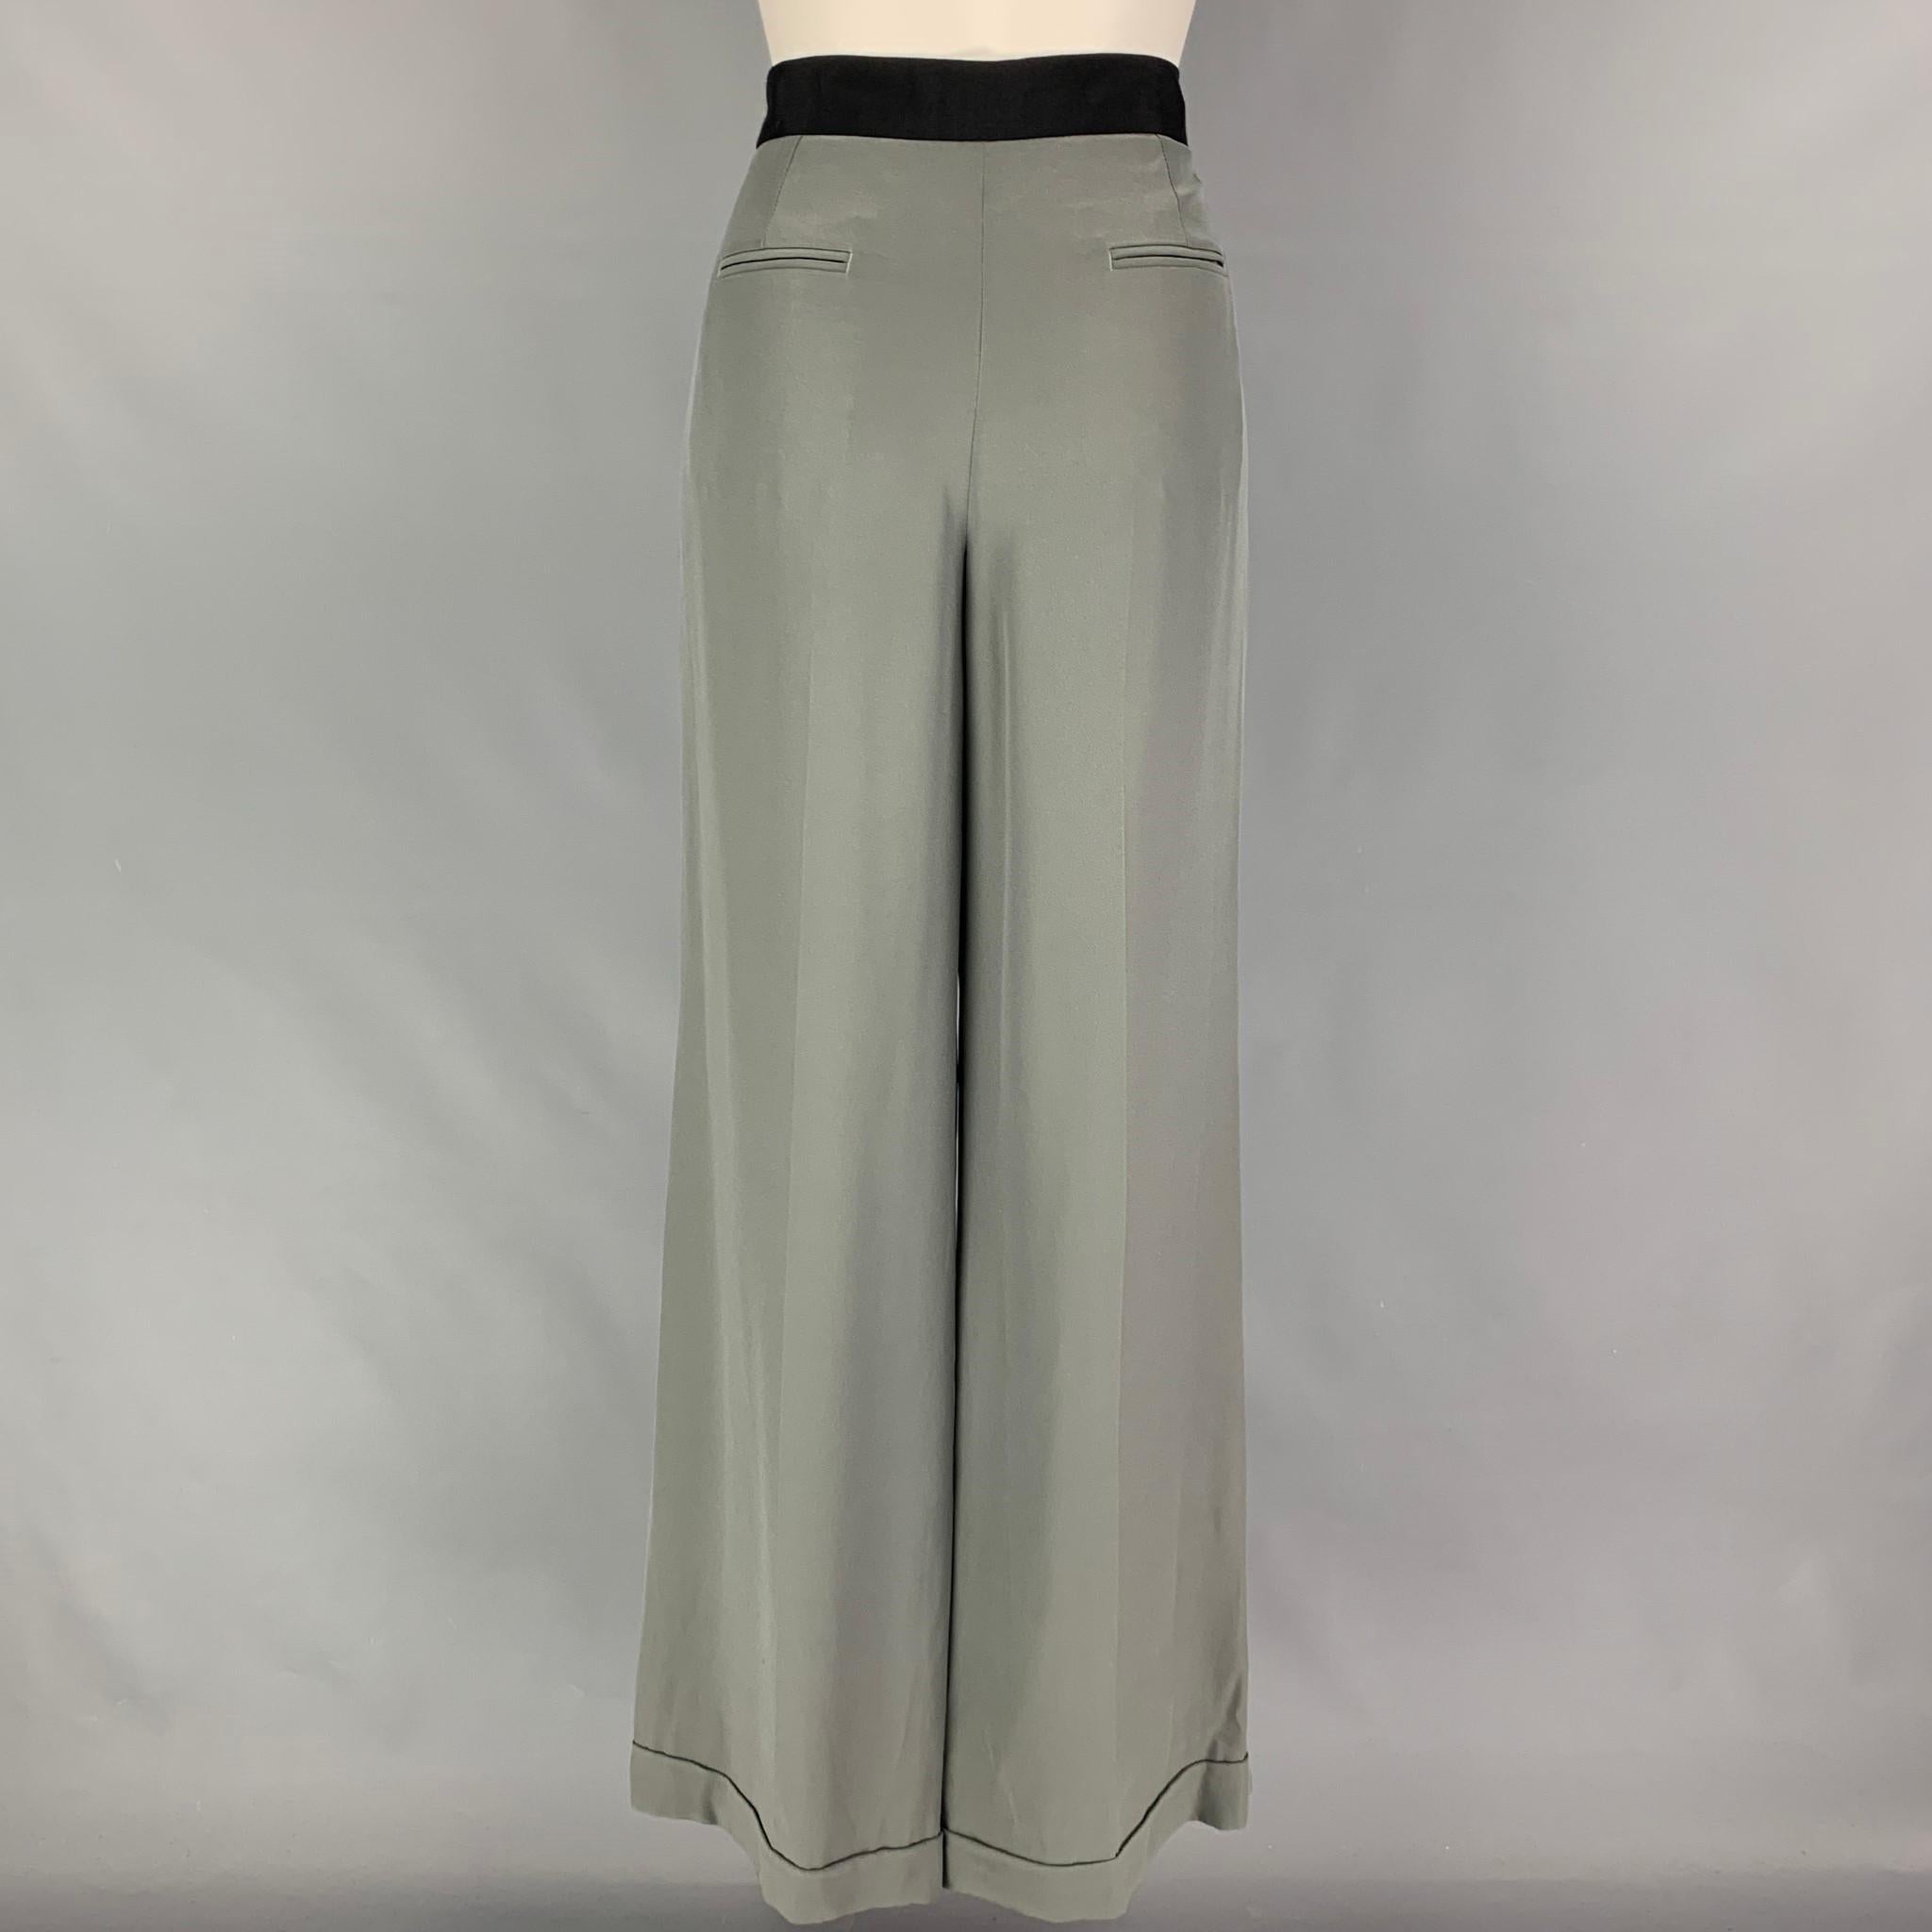 ARMANI COLLEZIONI pants comes in a grey acetate / silk featuring a ribbon waist trim, pleated, wide leg, cuffed front tab, and a zip fly closure. Made in Italy. 

New with tags.
Marked: 6
Original Retail Price: $895.00

Measurements:

Waist: 32